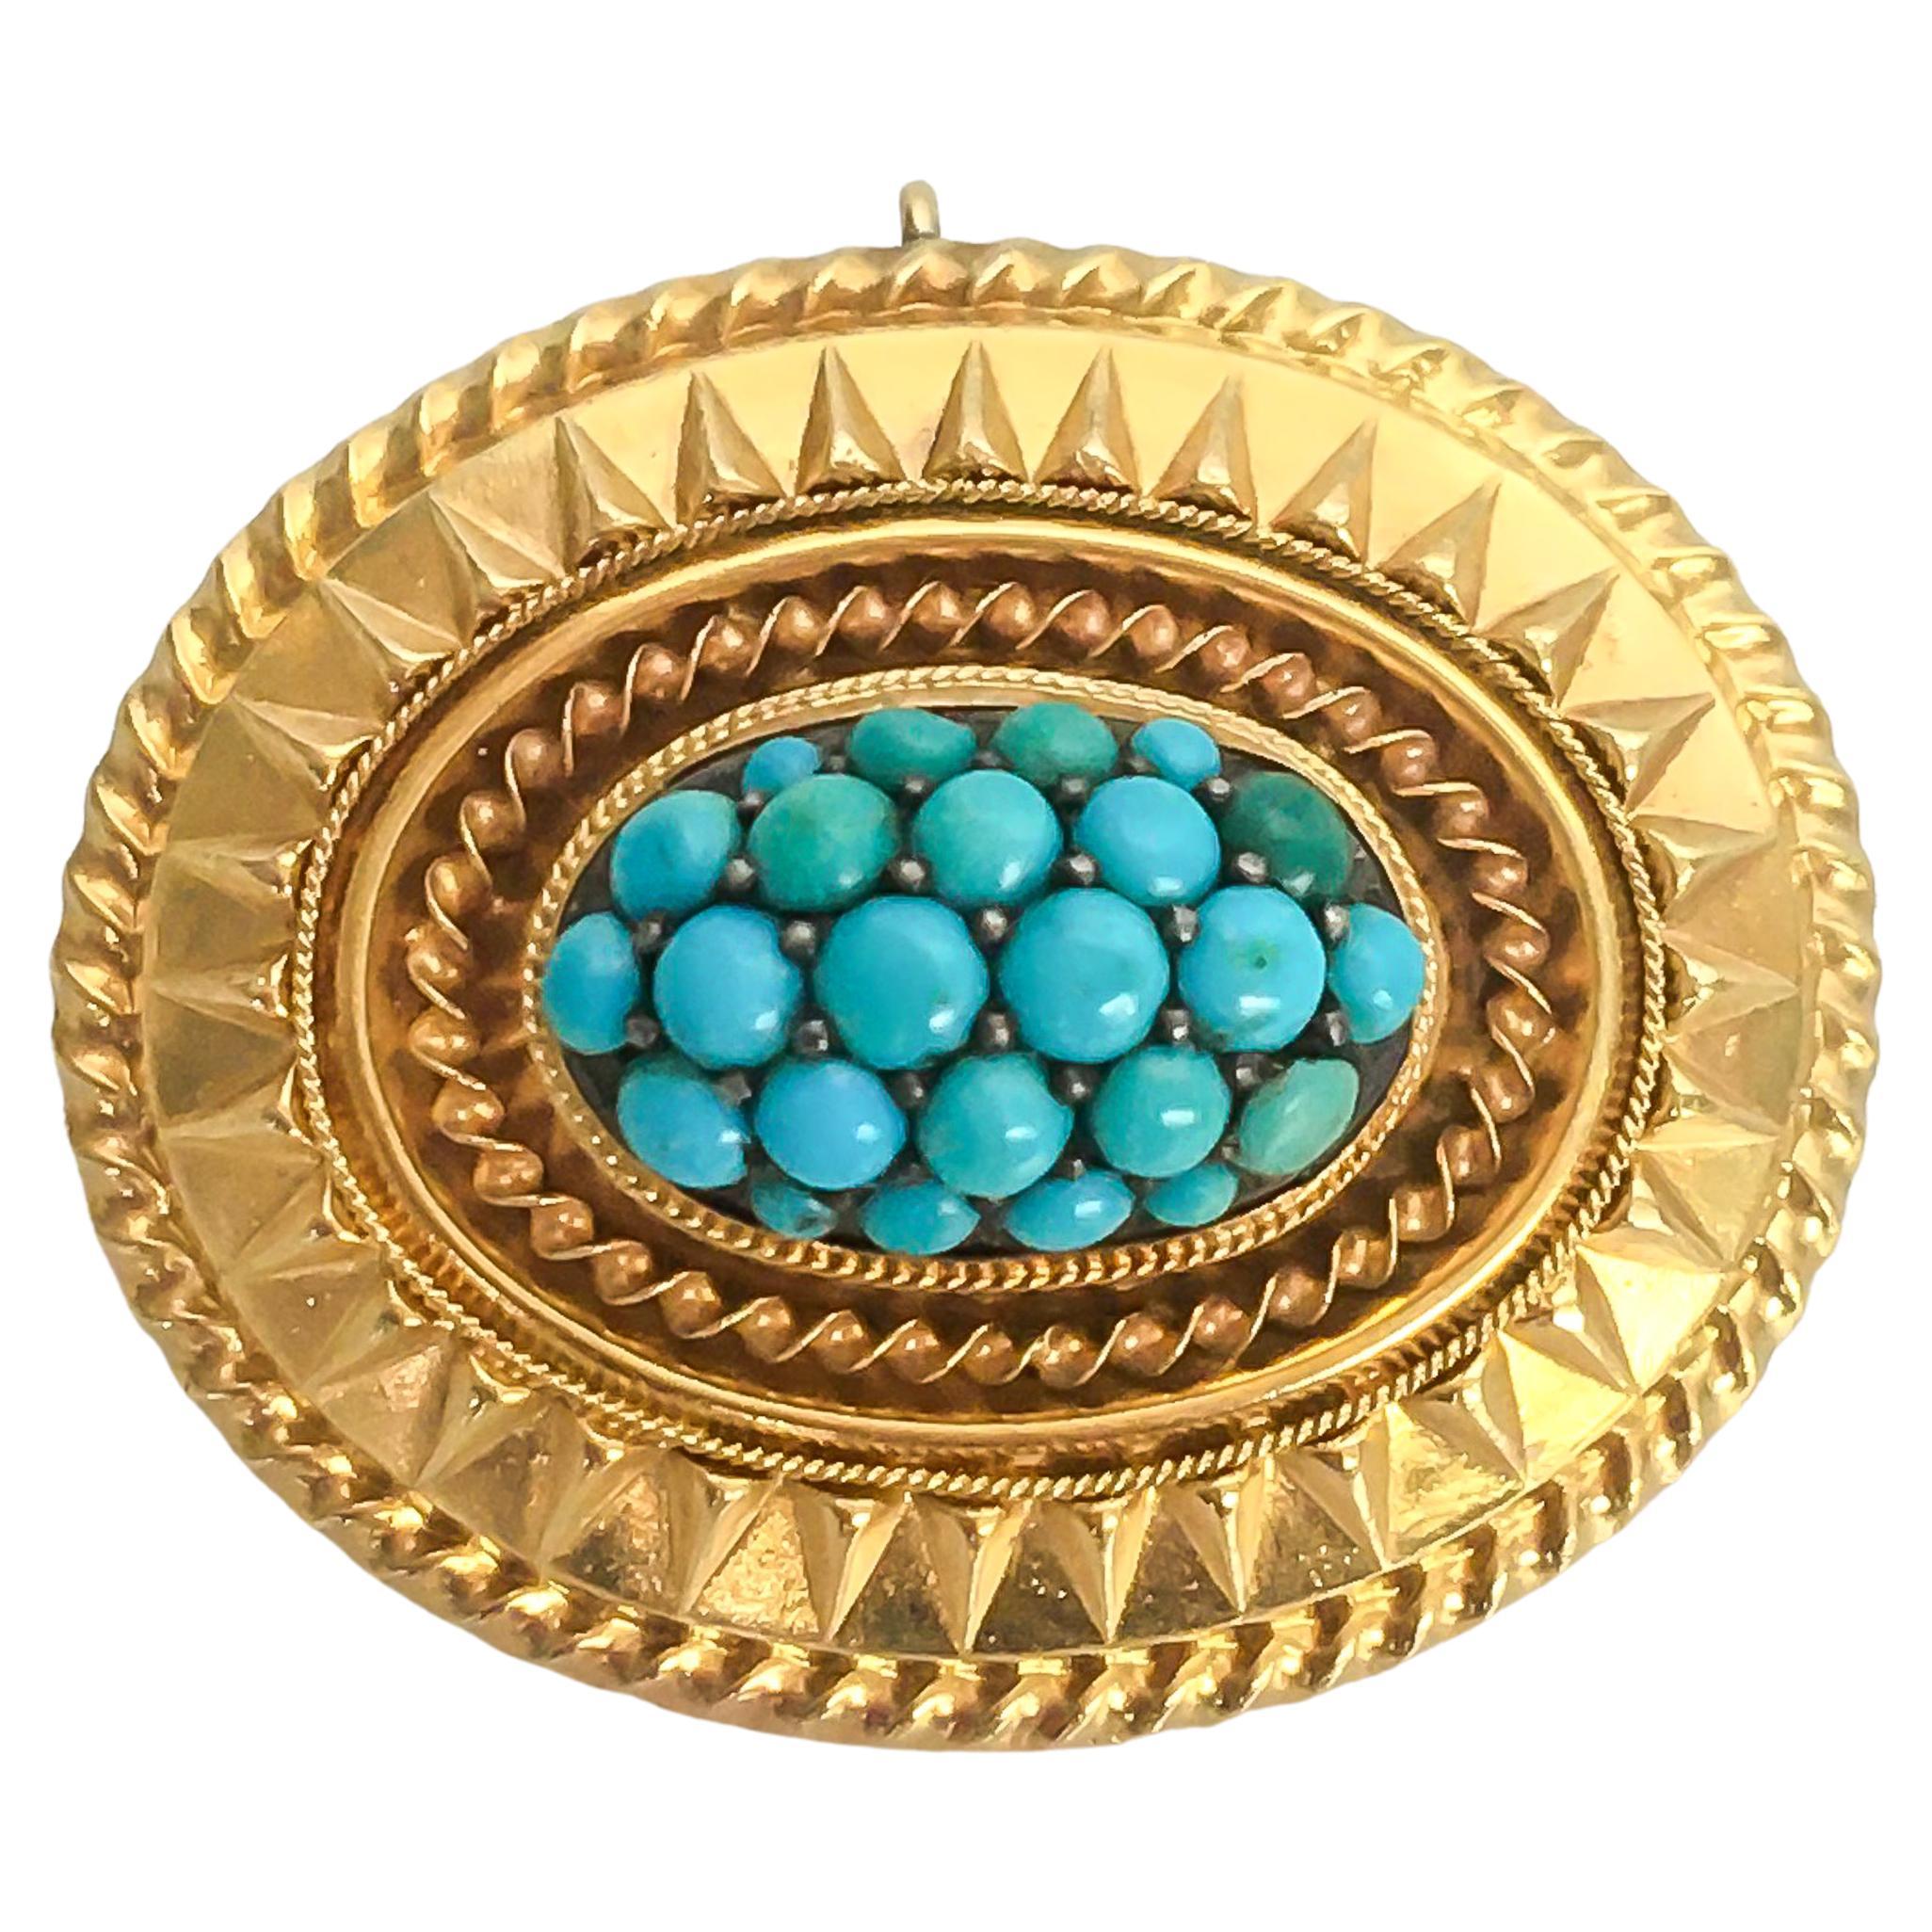 Vintage Bronze Filigree Metal Brooch With A Polished Blue Marbled Stone Centre